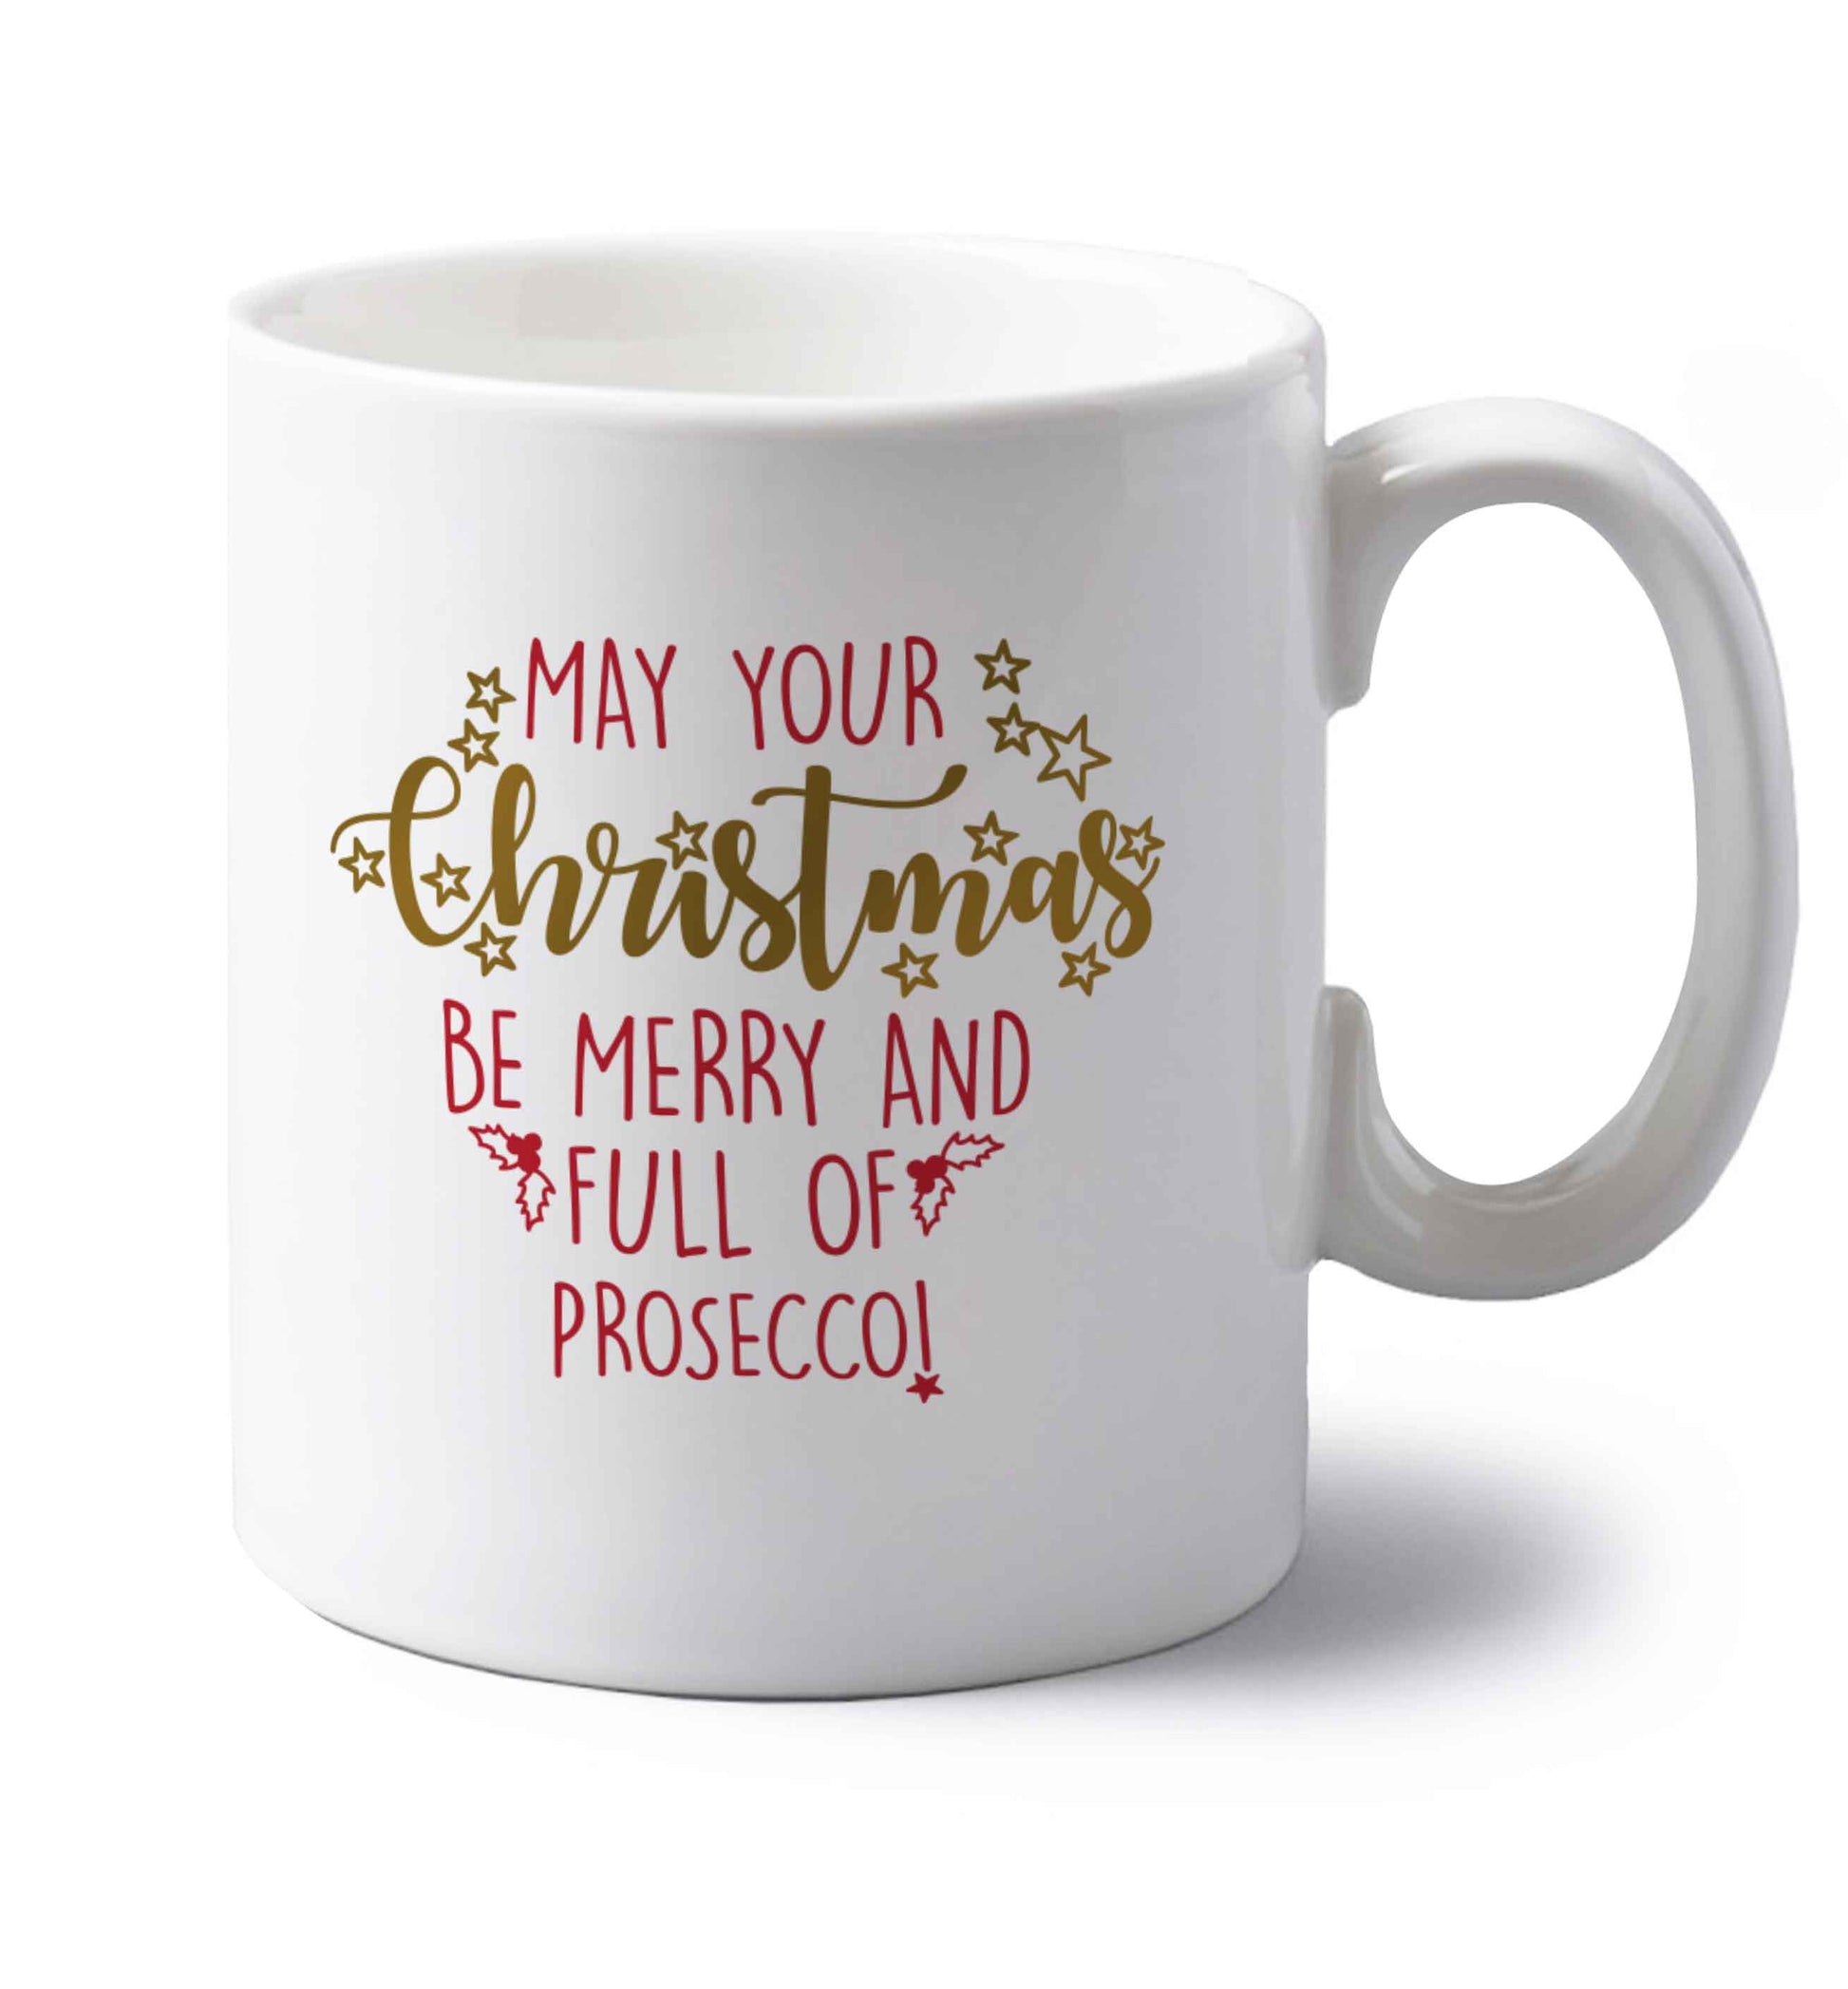 May your Christmas be merry and full of prosecco left handed white ceramic mug 